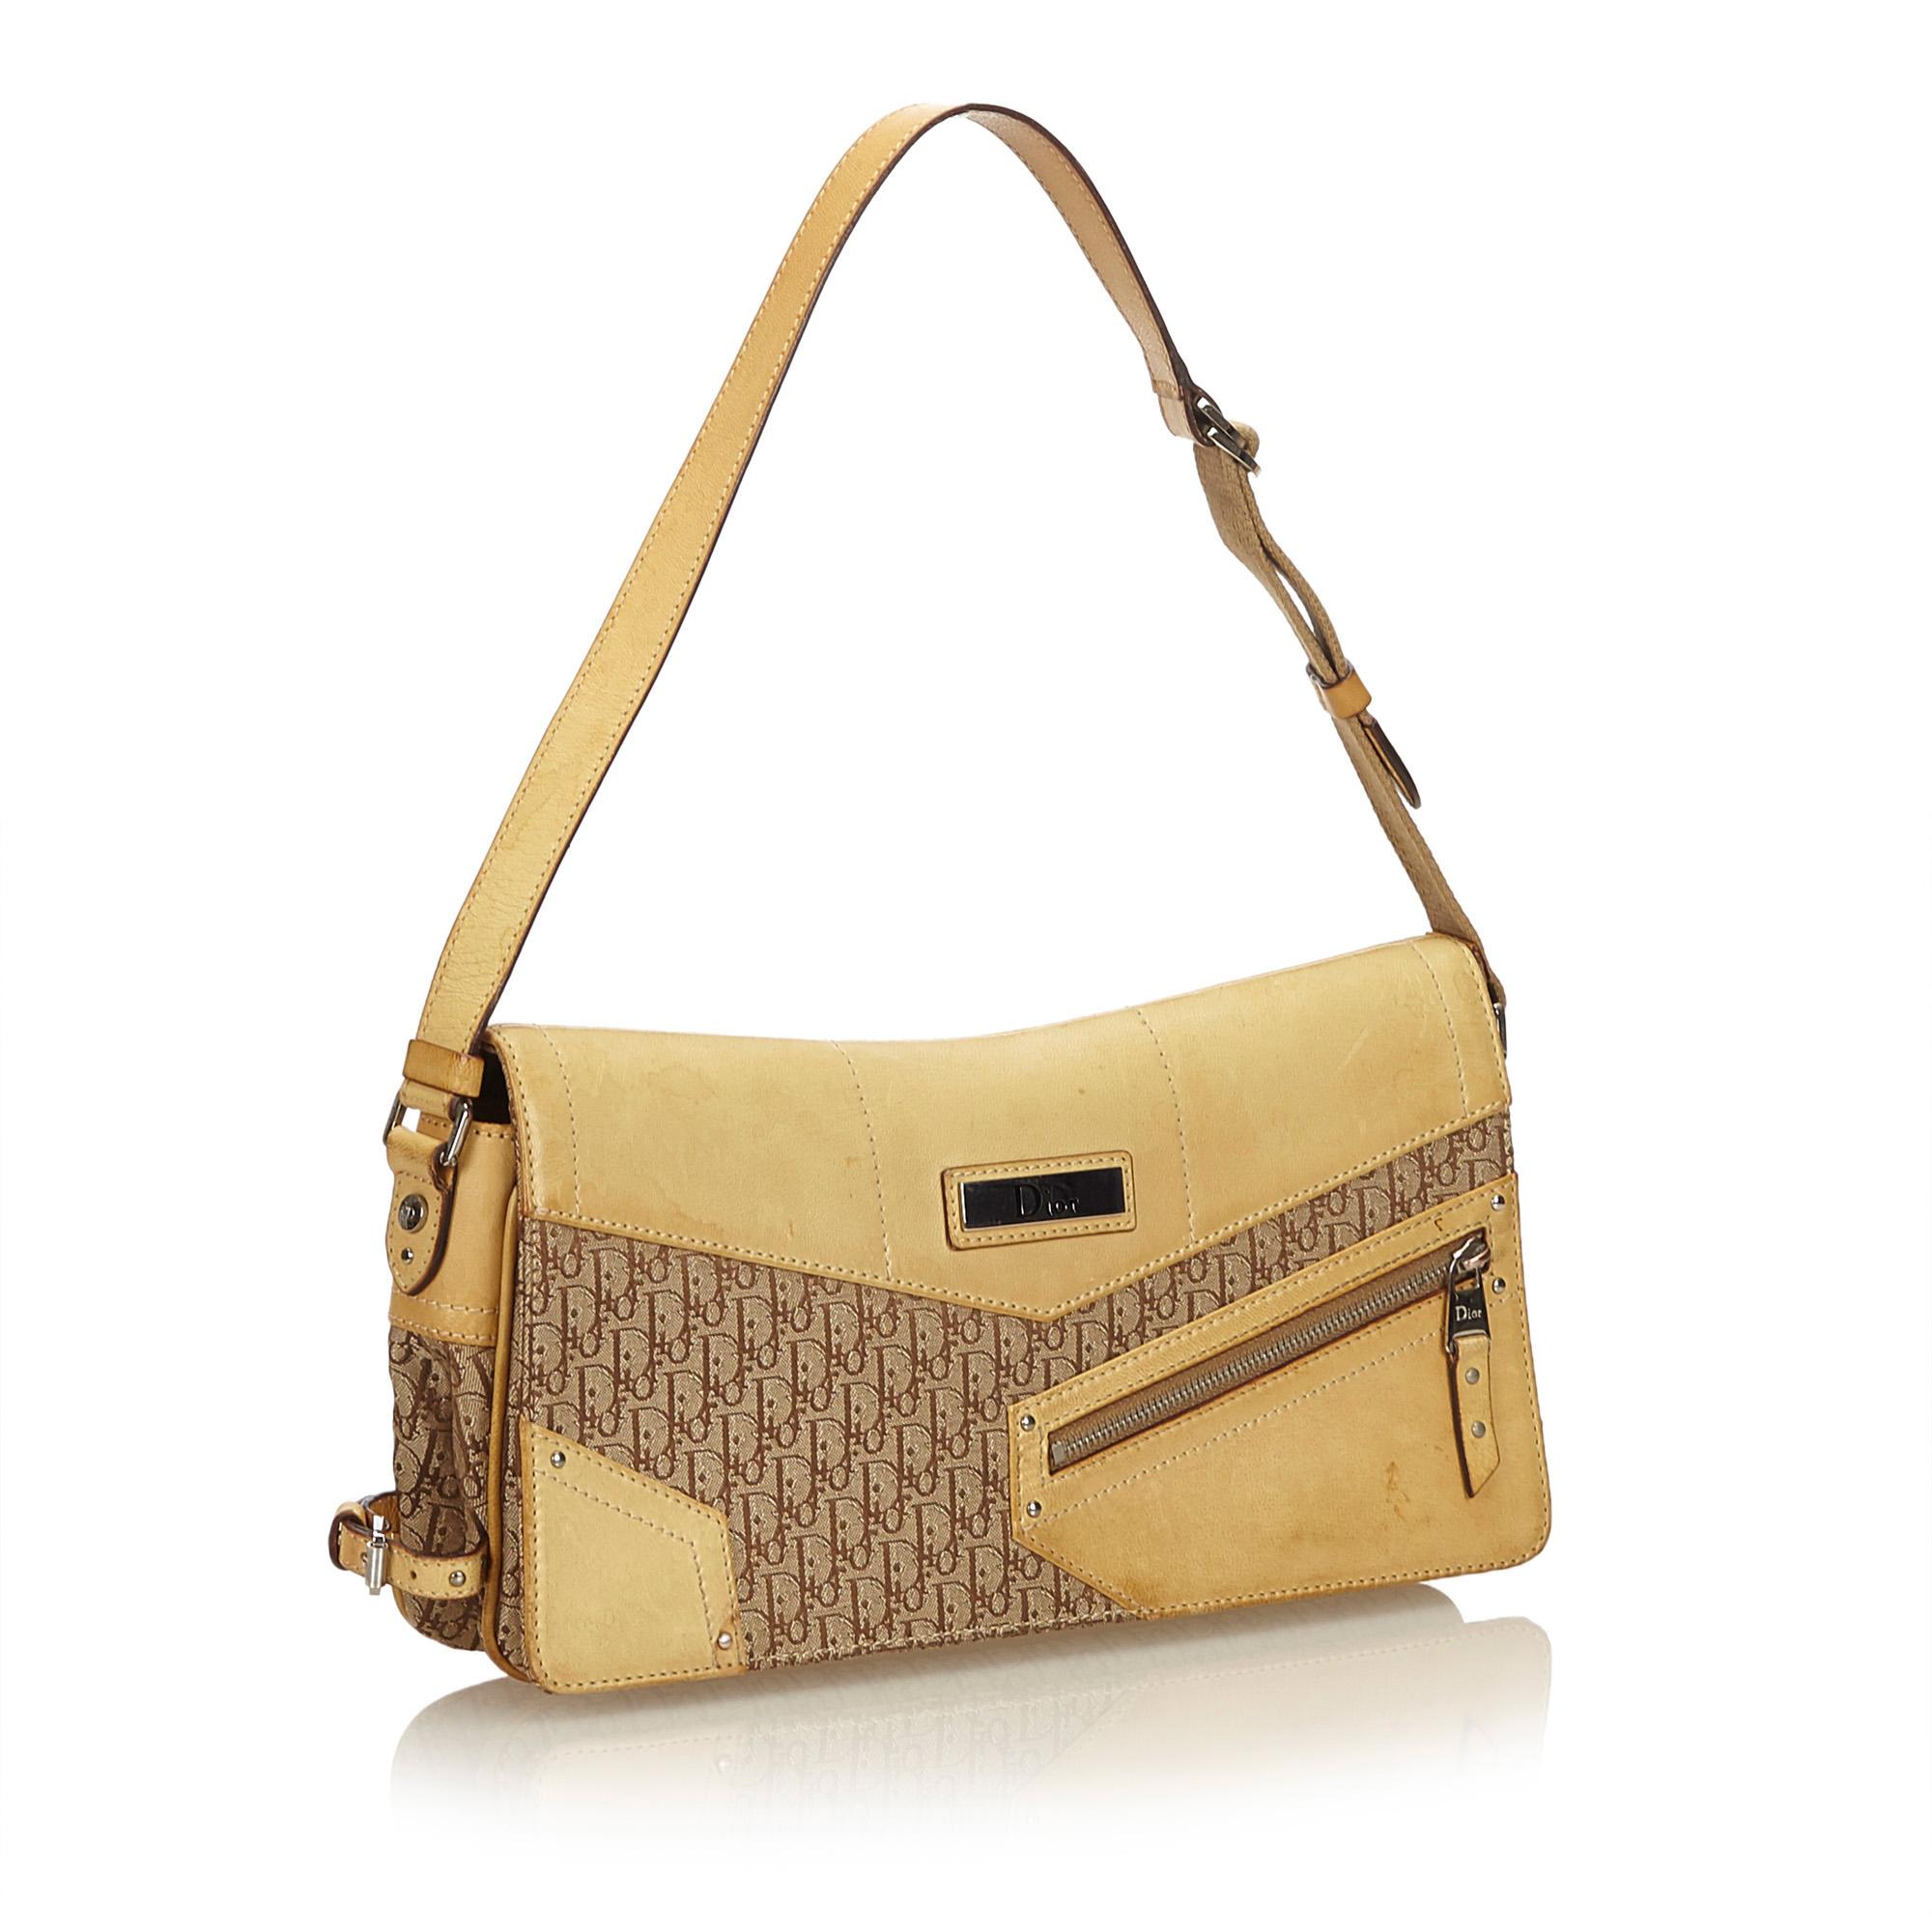 This shoulder bag features a canvas body with leather trim, flat leather strap, front flap with magnetic closure, exterior zip pocket and interior zip pocket. It carries as B condition rating.

Inclusions: 
This item does not come with